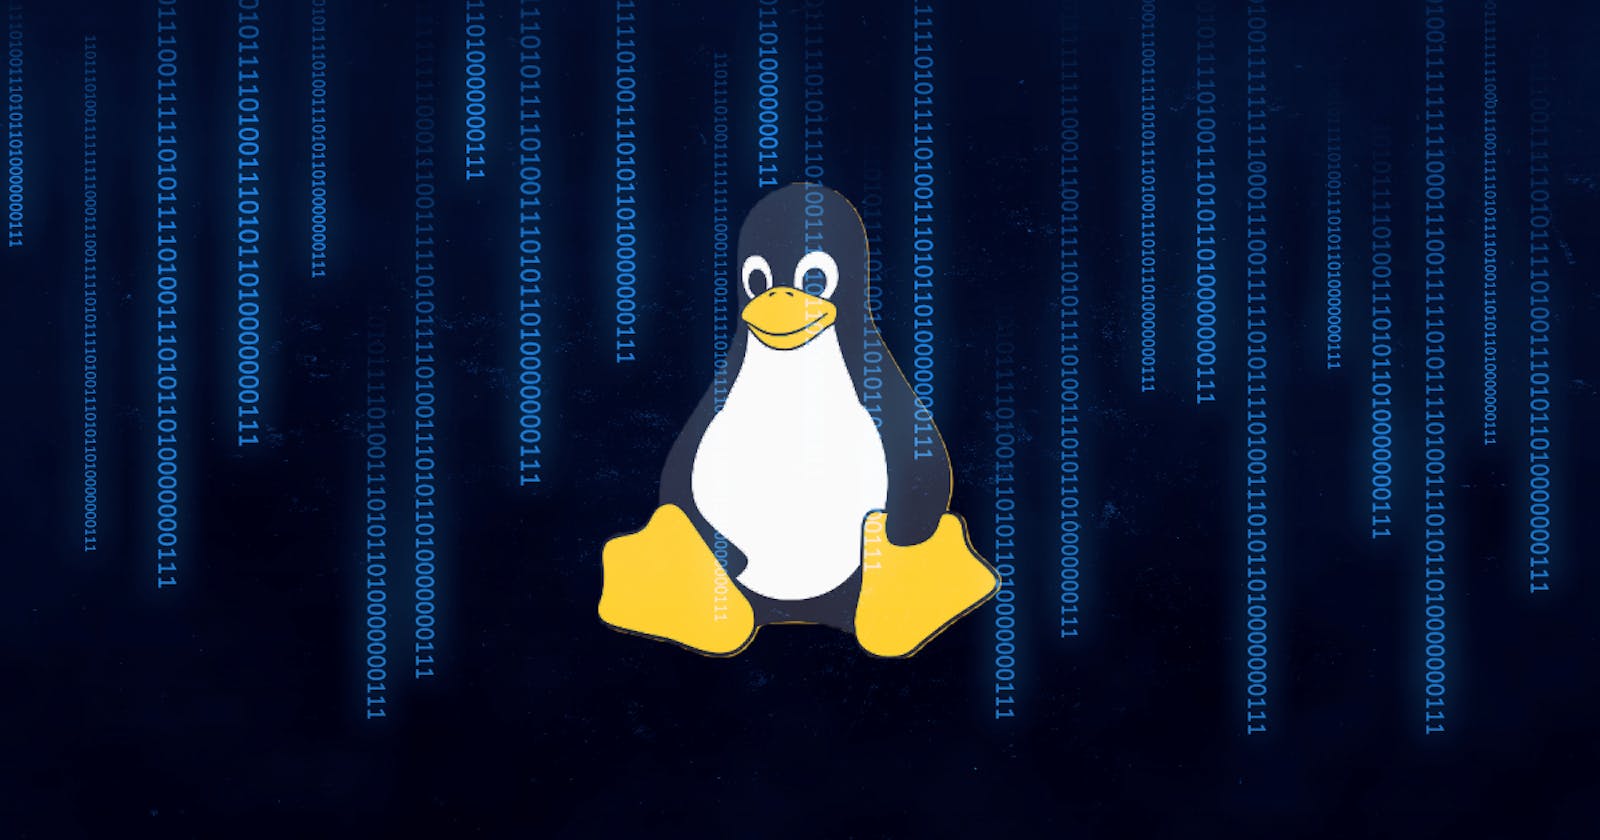 IceFire Ransomware Targets Linux Enterprise Networks in the Media and Entertainment Sector